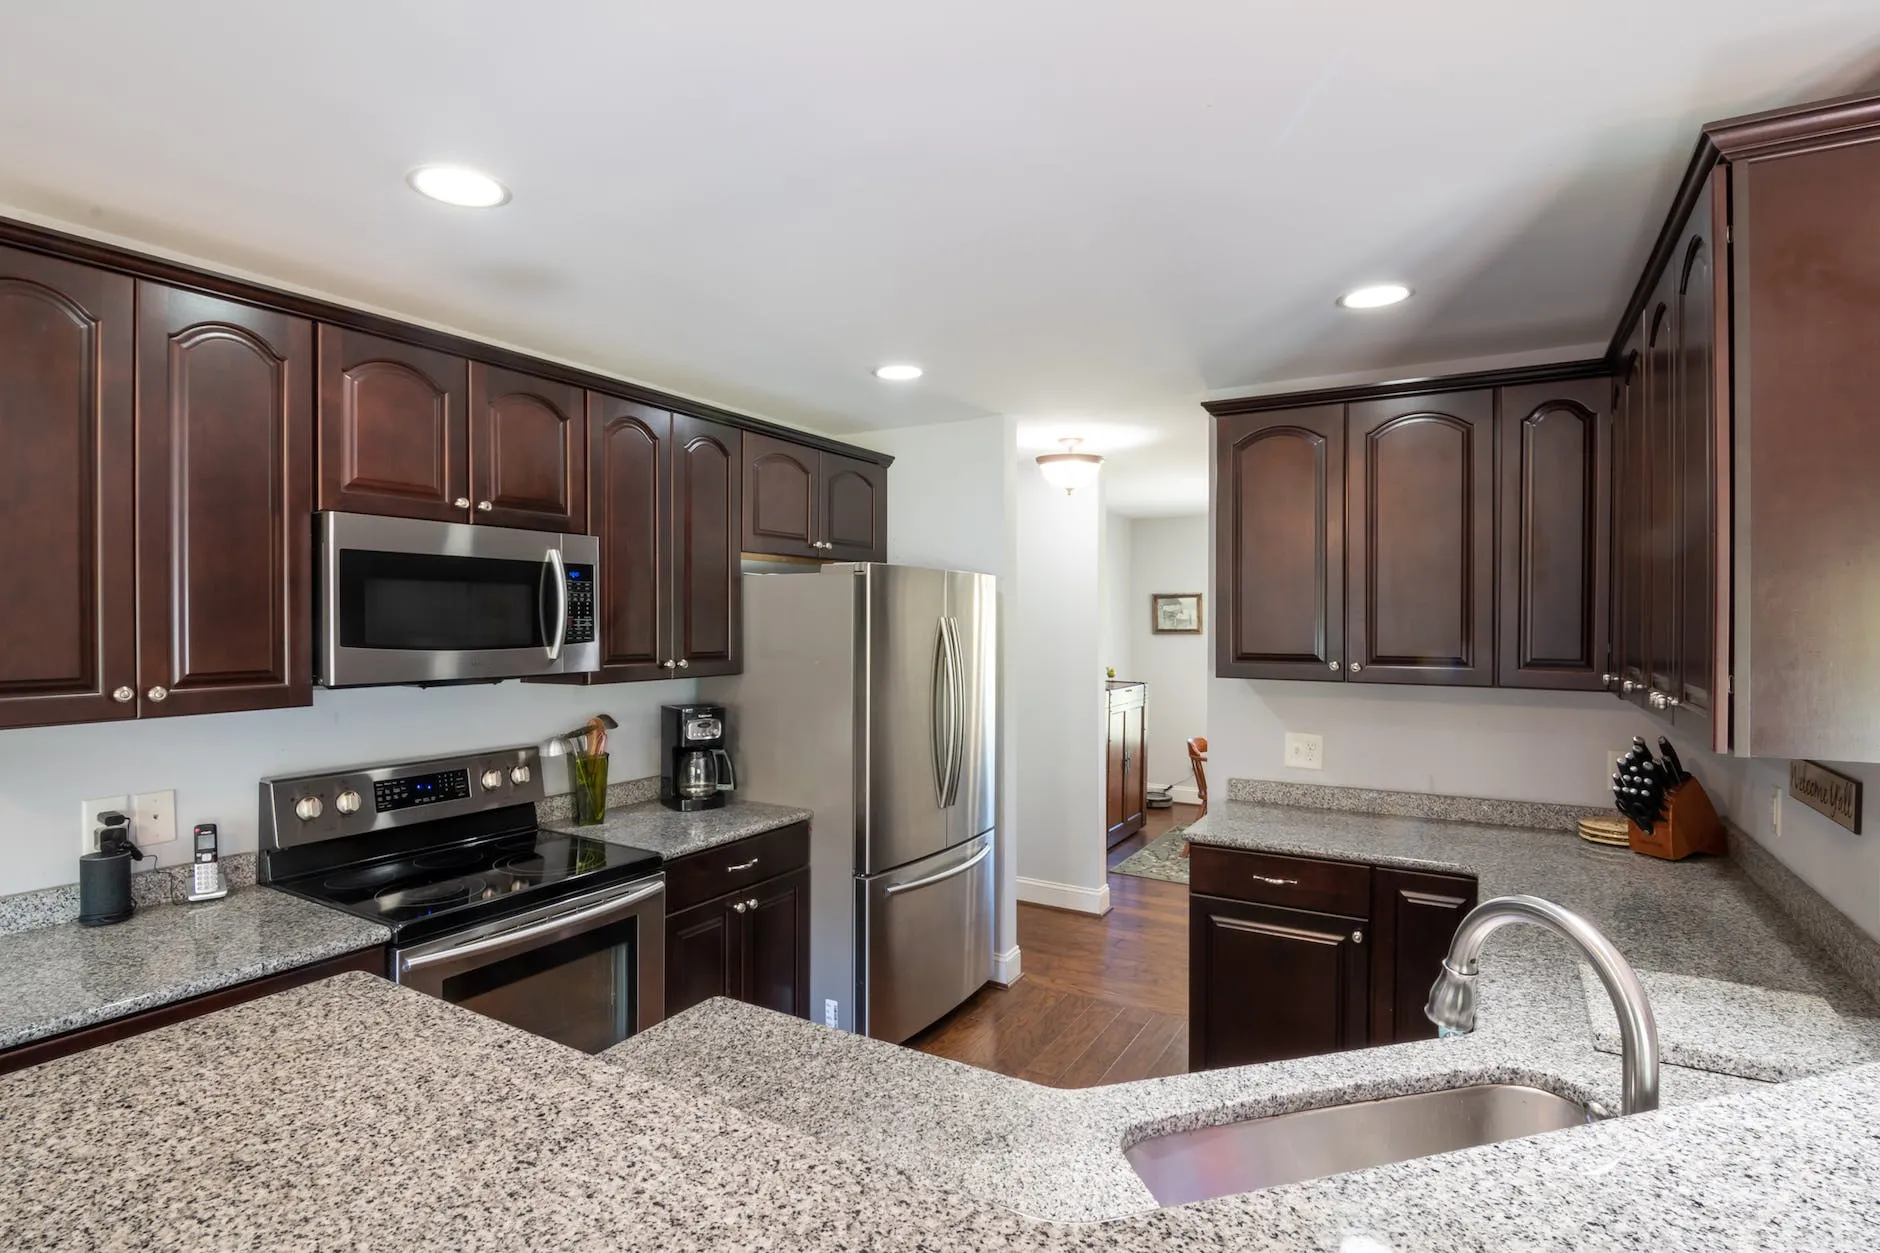 Types of Woods Used for Kitchen Cabinets